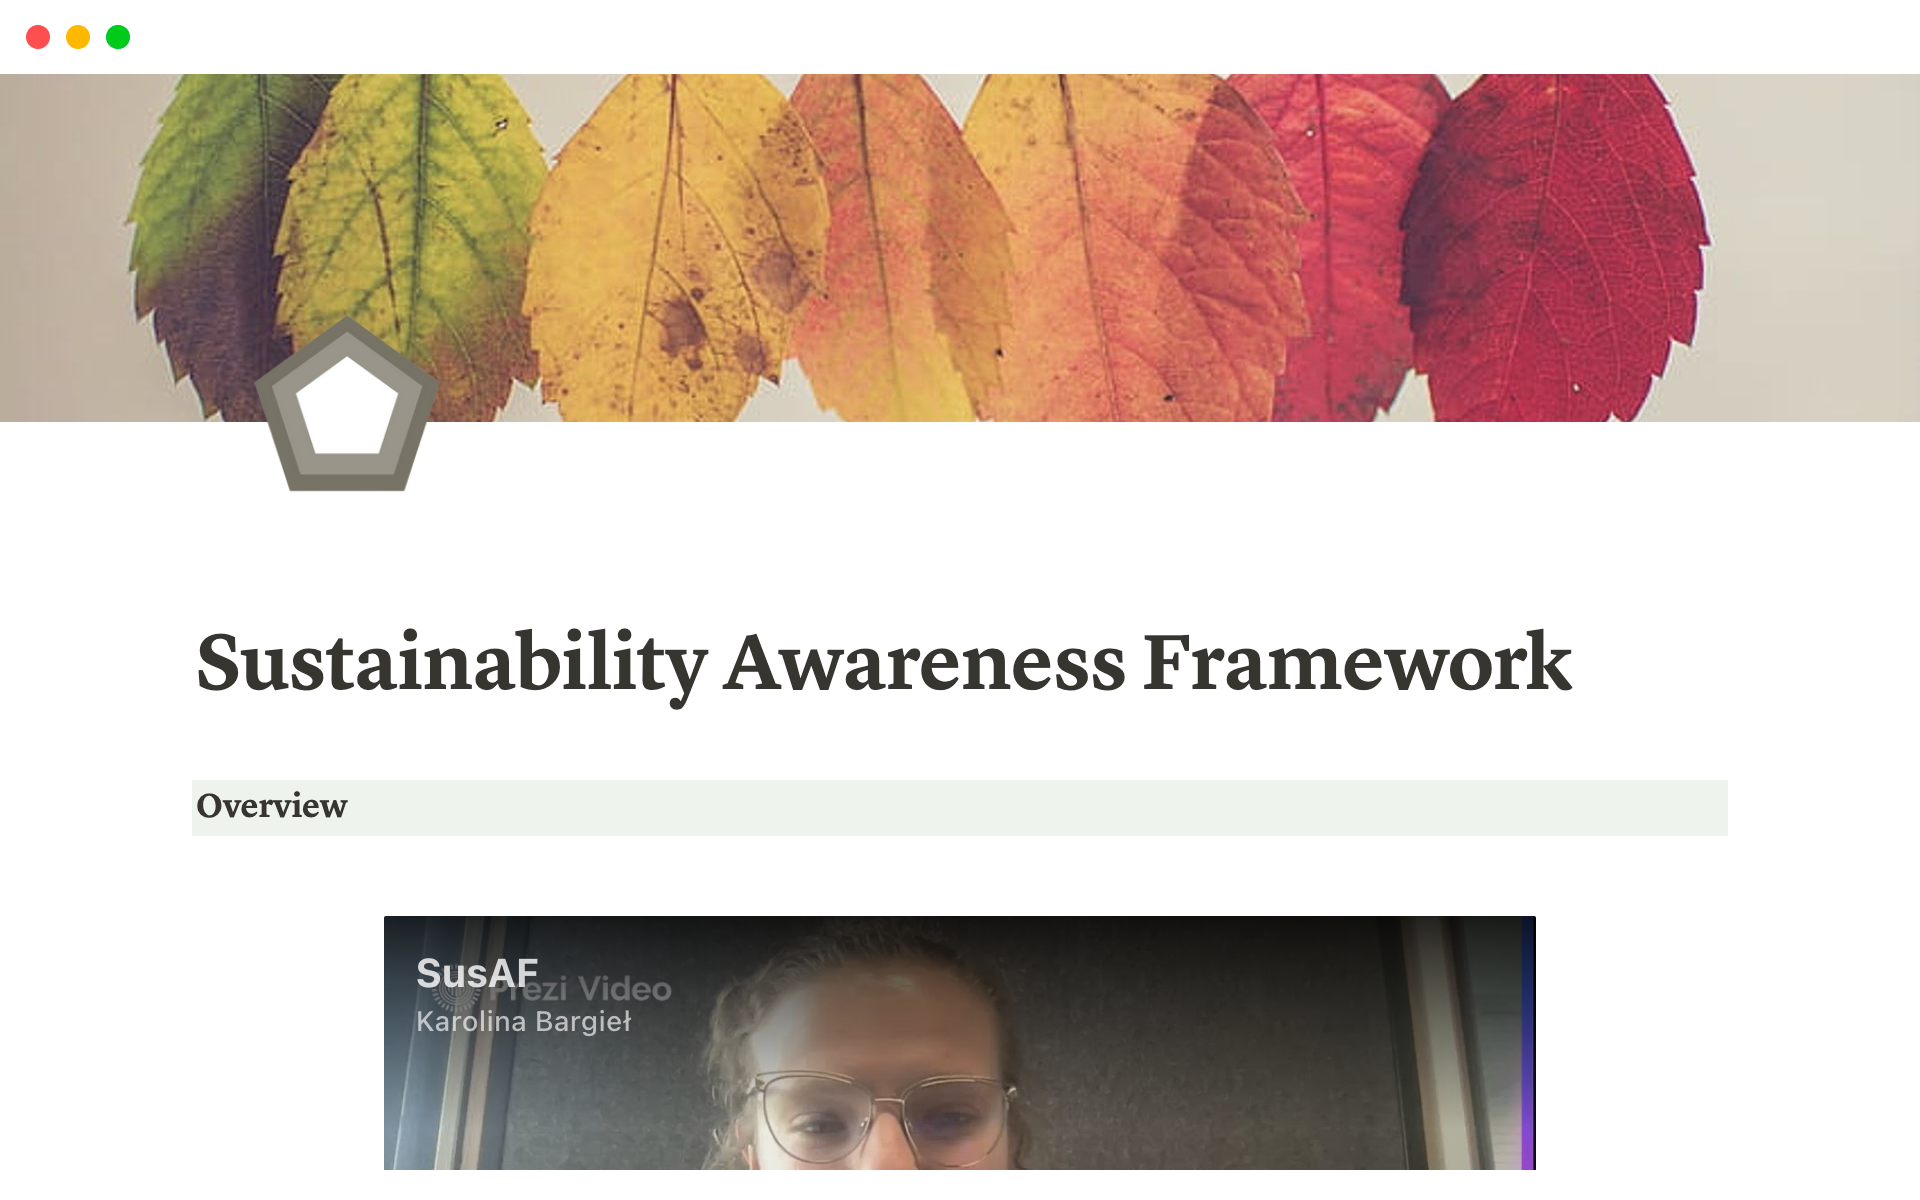 This framework aims to help identify the sustainability impacts of IT products and services on the five dimensions of sustainability across three orders of effect.